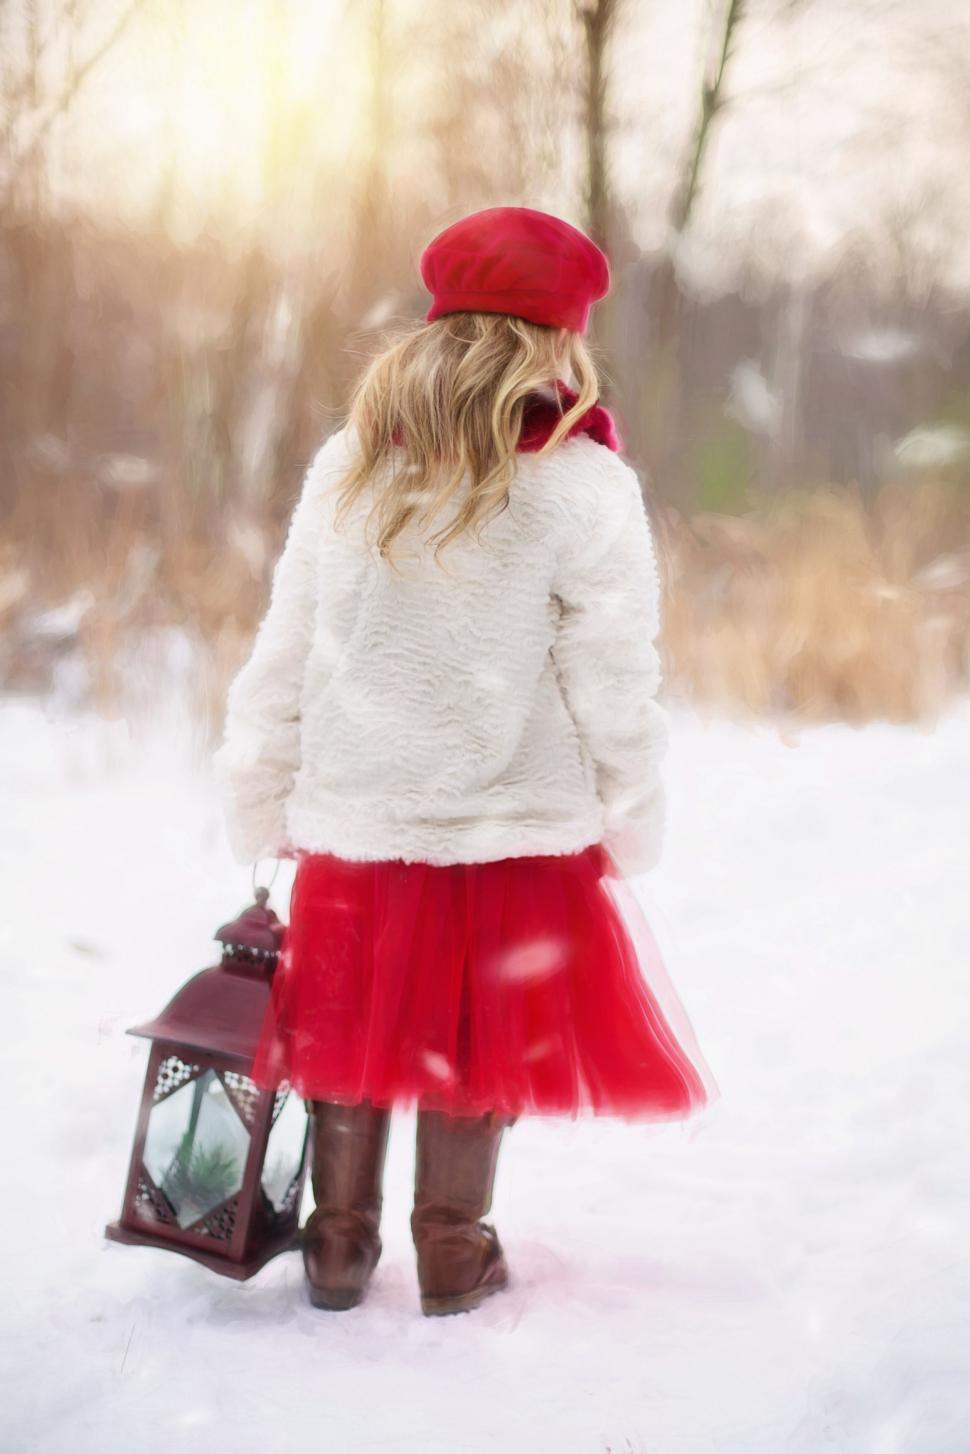 Free Image of Little Girl With Christmas lantern in Snow 